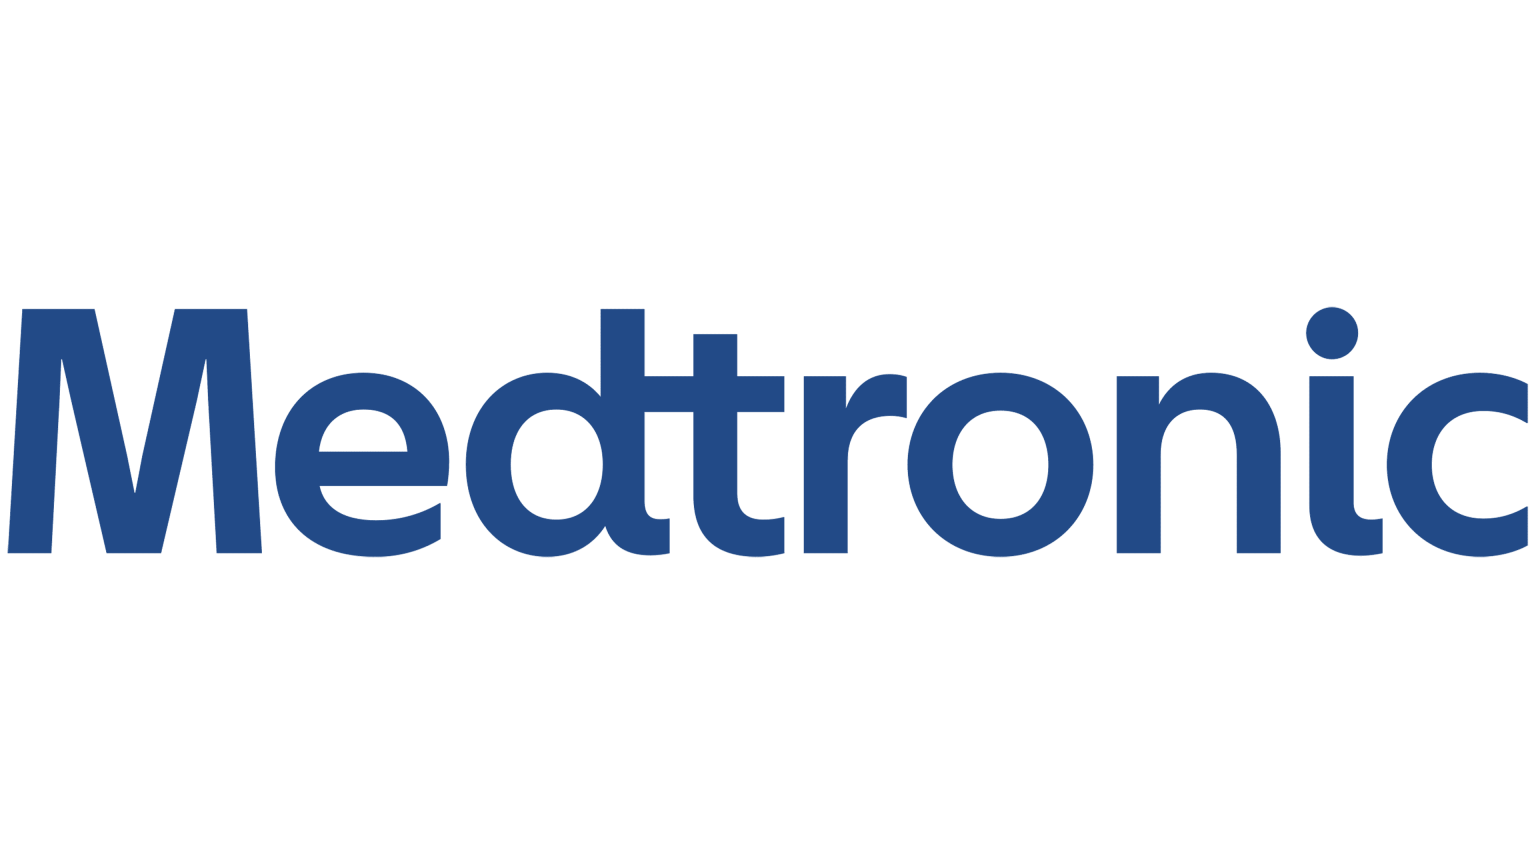 Medtronic logo on a black background for the homepage.